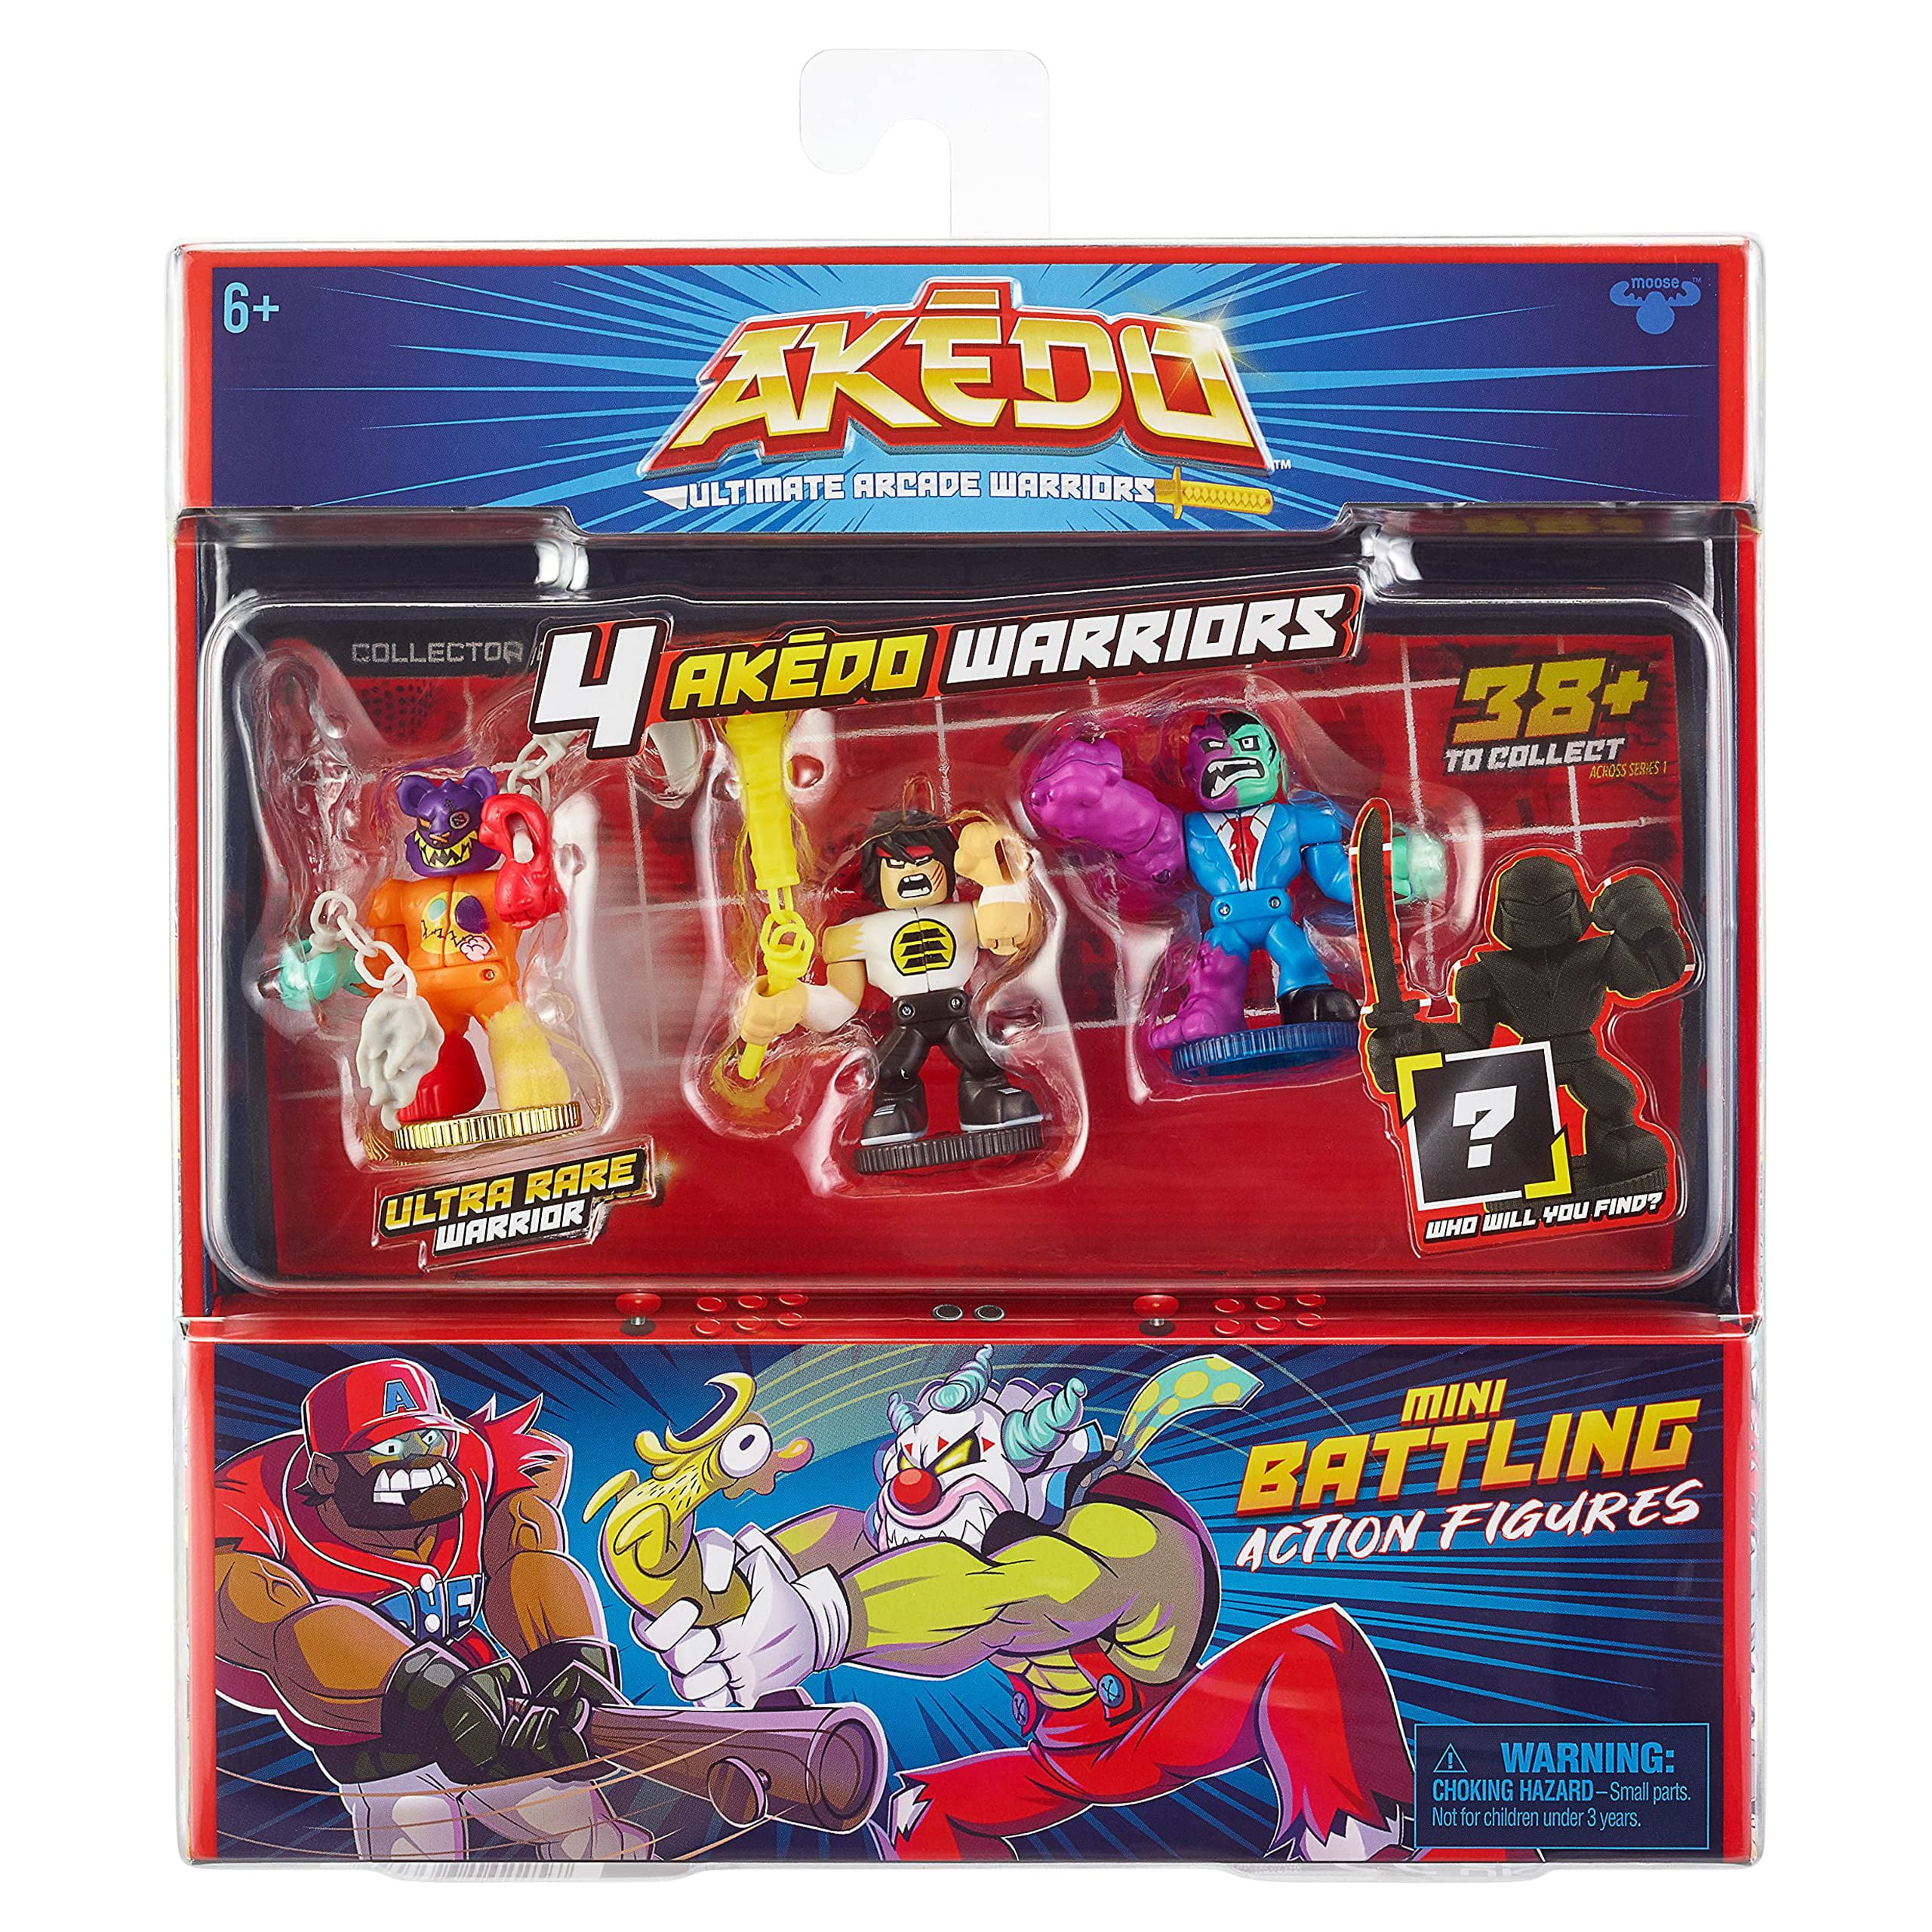 Pack deluxe - akedo, figurines